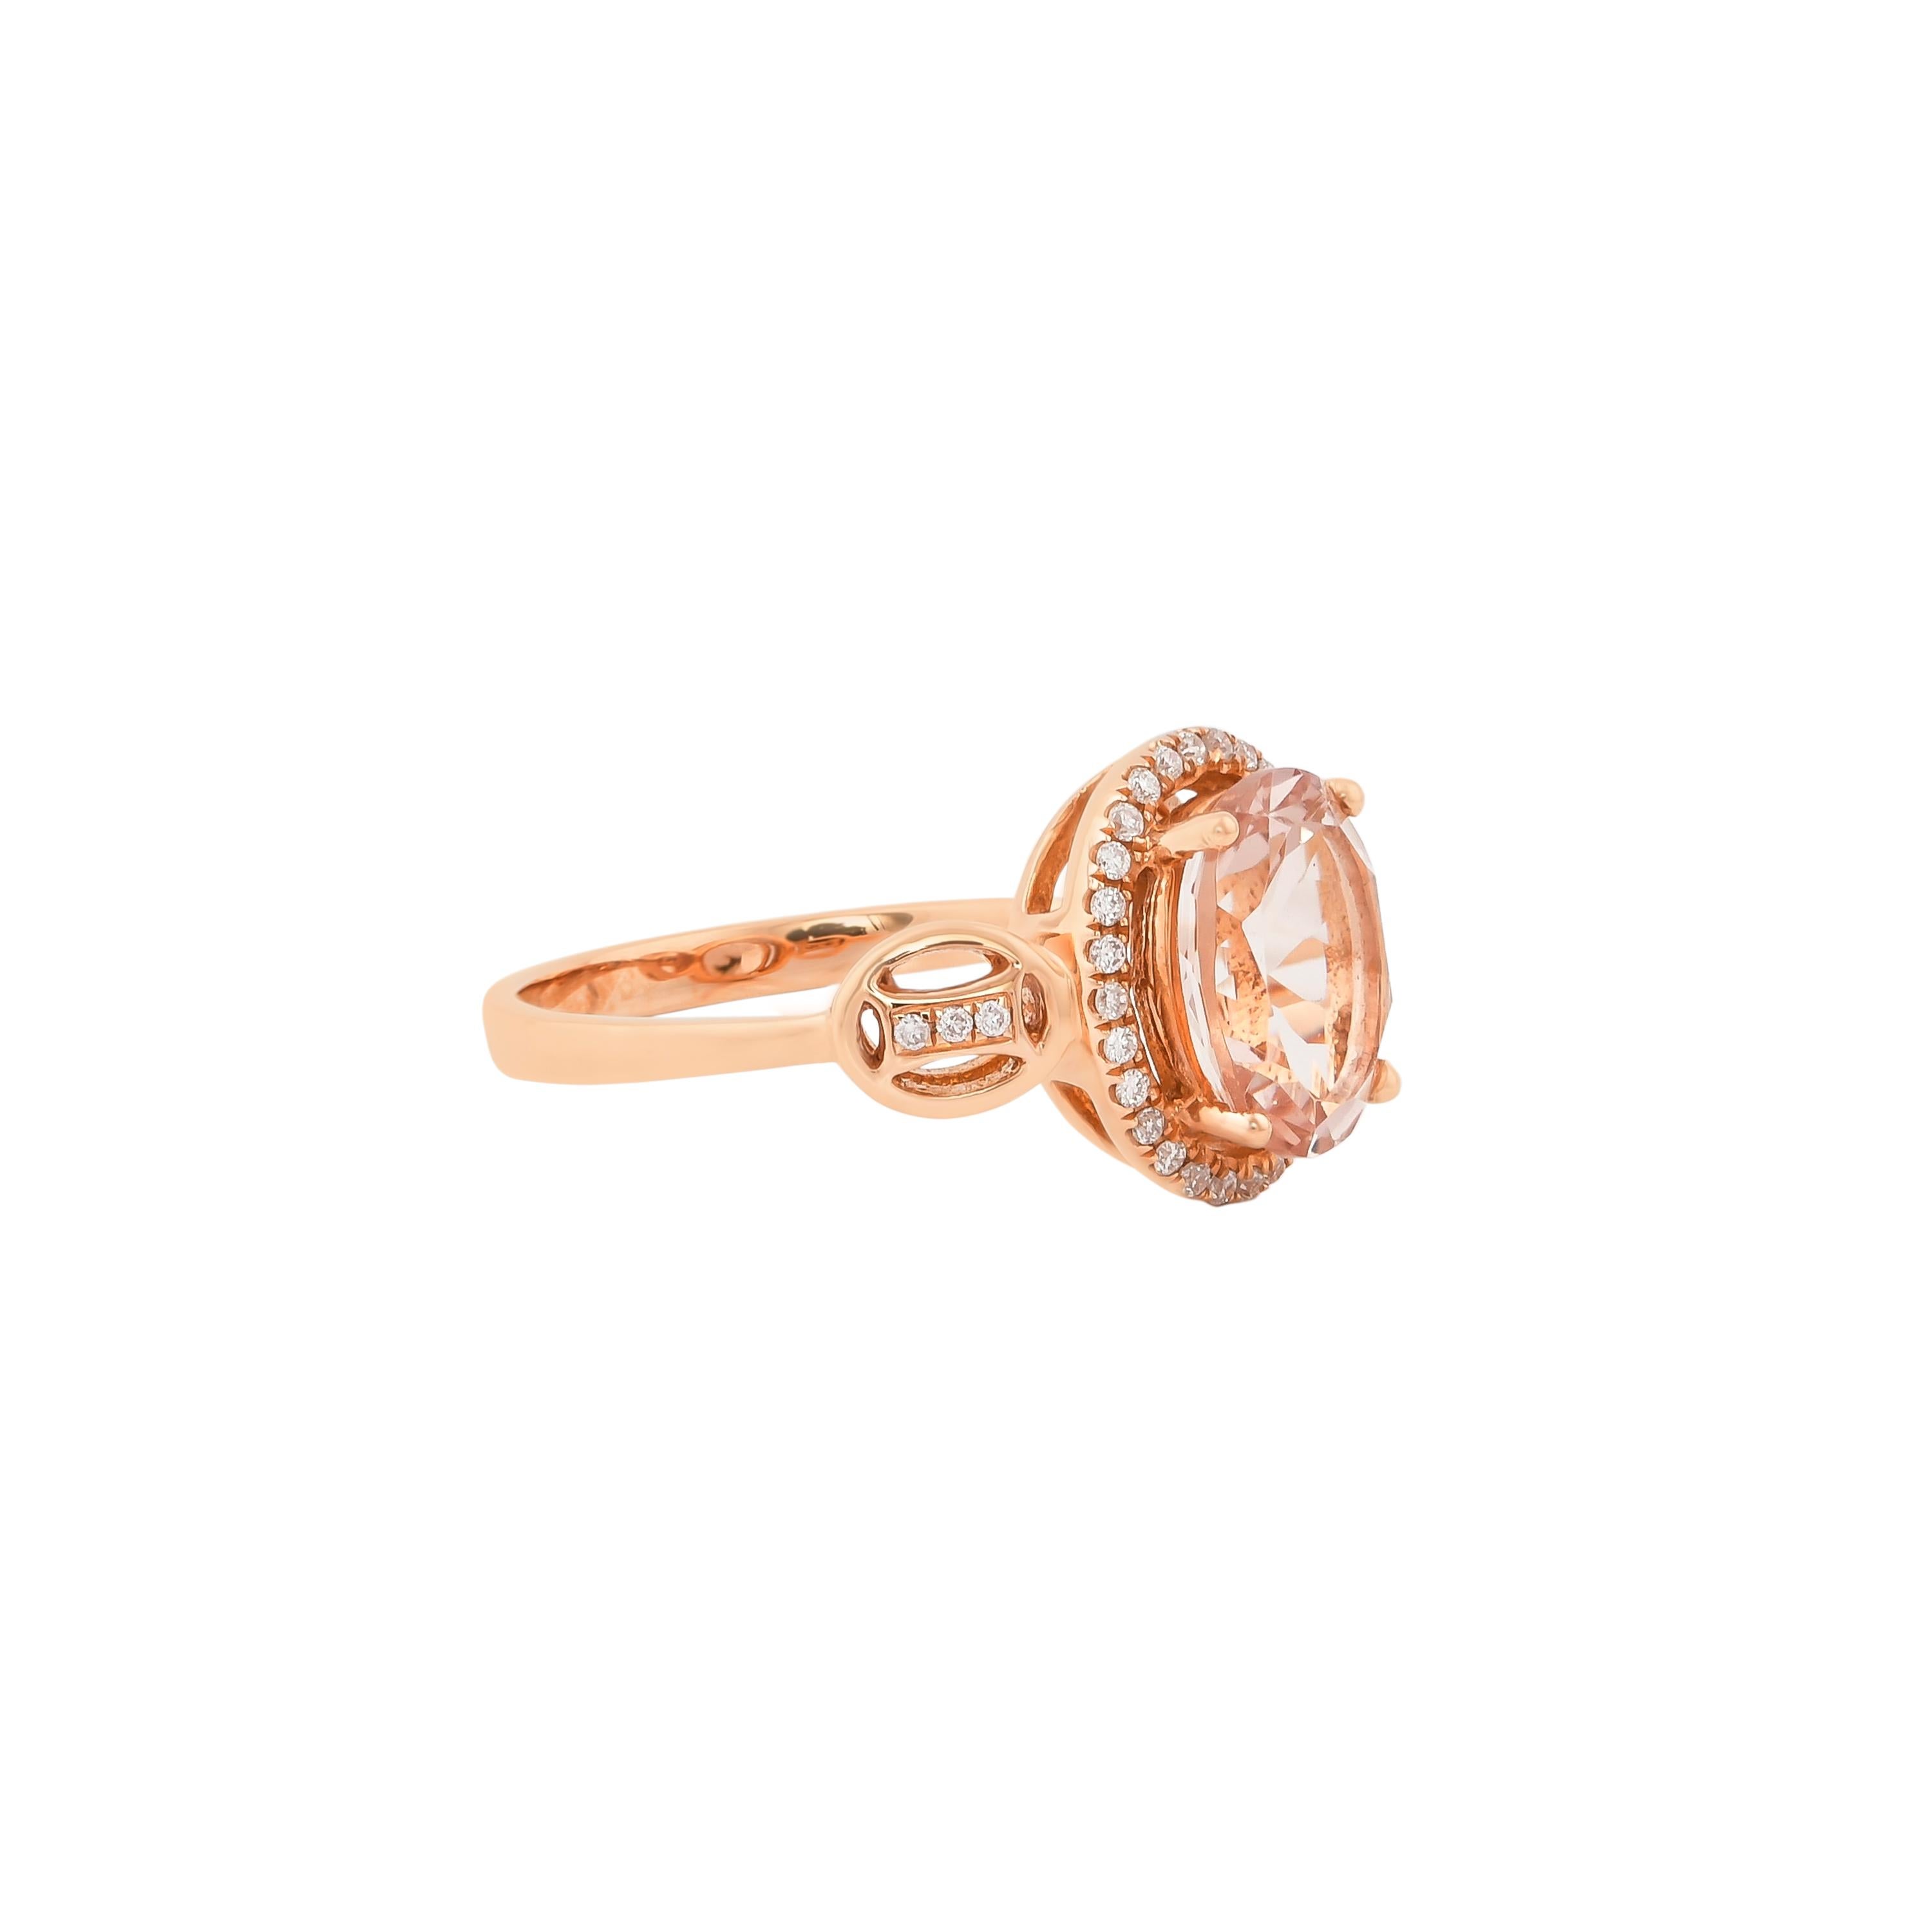 Contemporary 2.4 Carat Morganite and Diamond Ring in 18 Karat Rose Gold For Sale